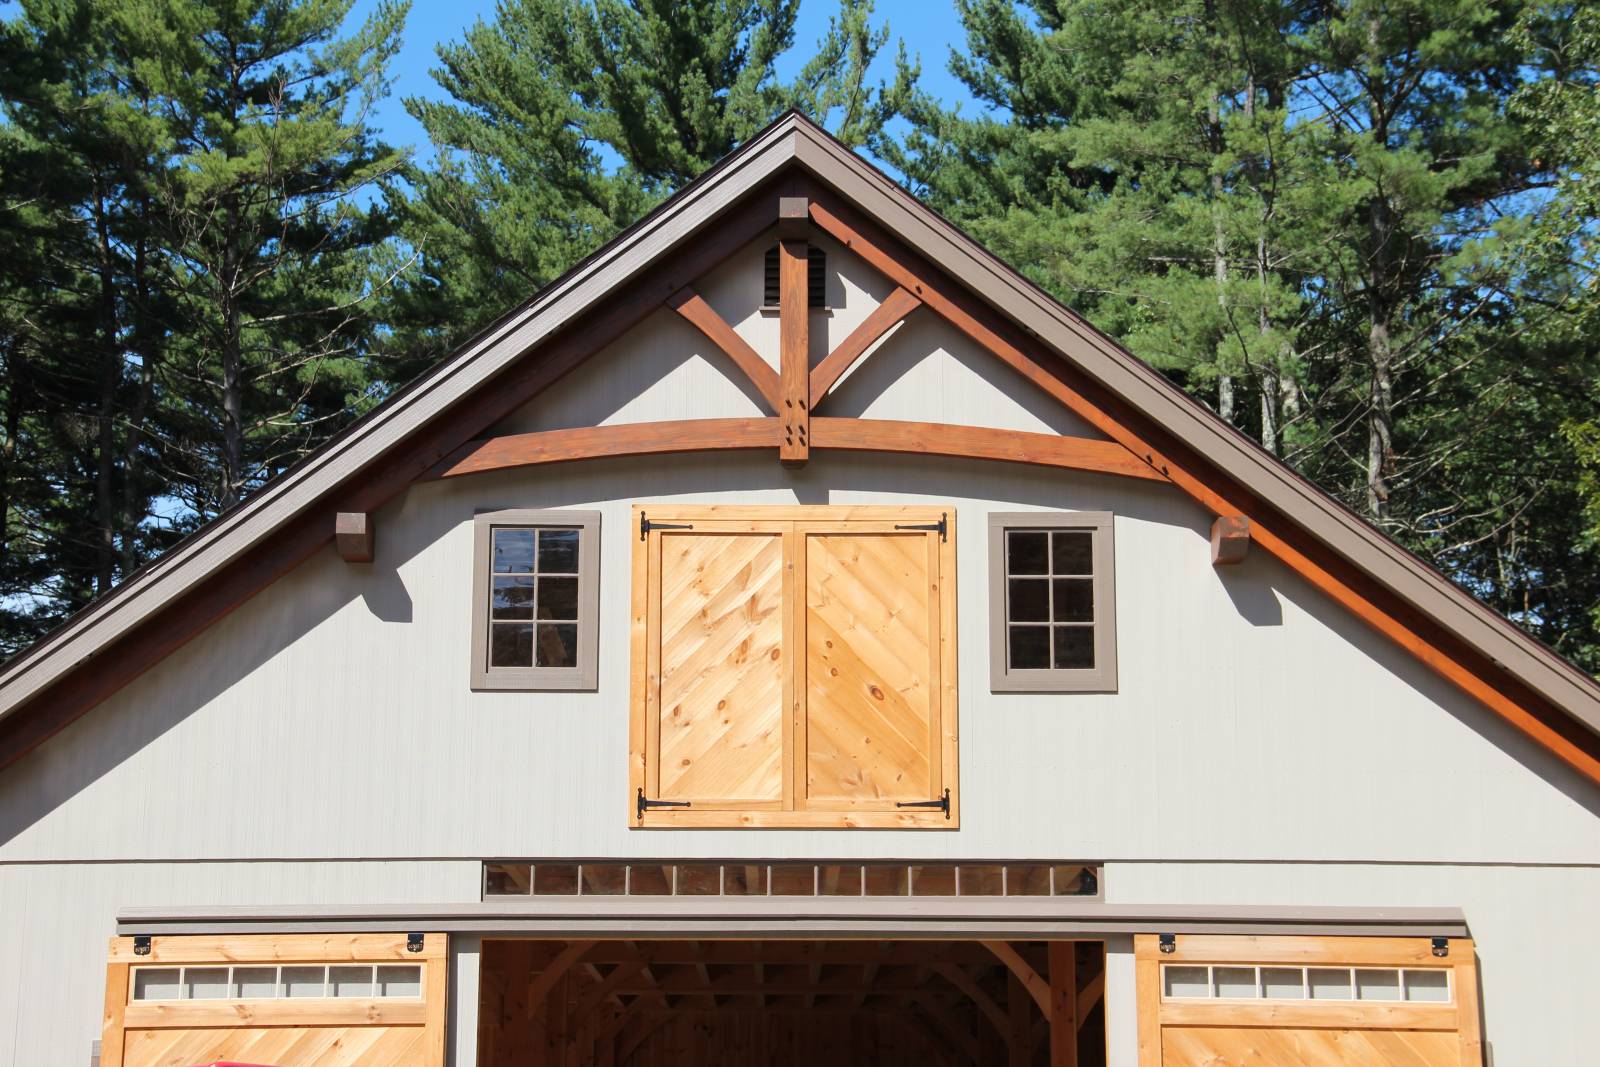 Exterior: Timber Truss in Gable